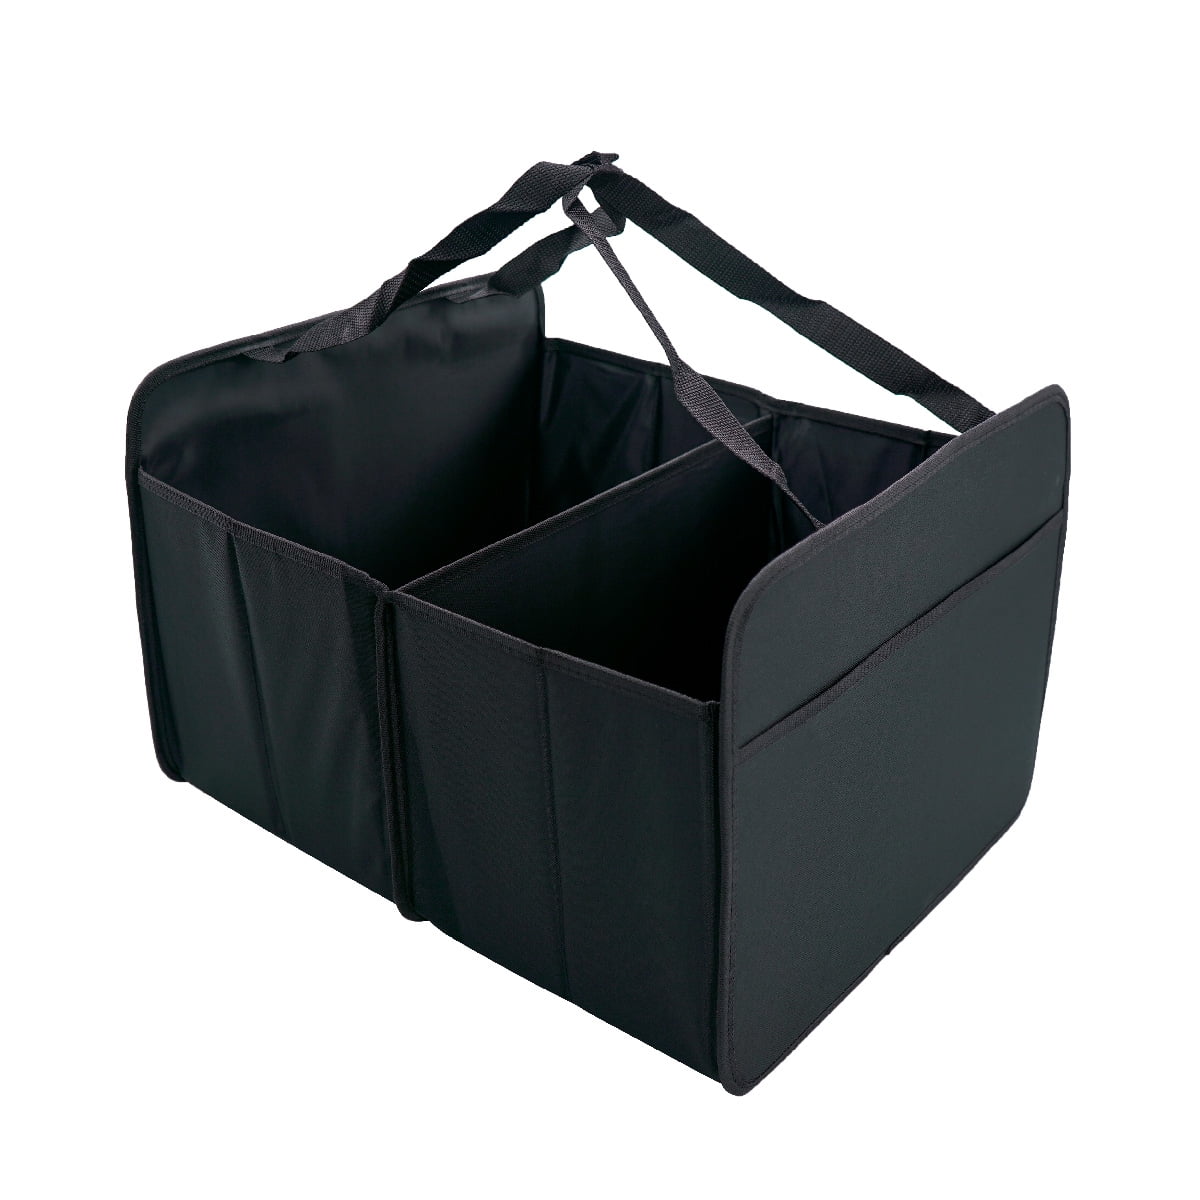 Auto Drive Hard-Sided Collapsible Trunk 18.5"x16.54"x9.96" for Truck and SUV - Walmart.com